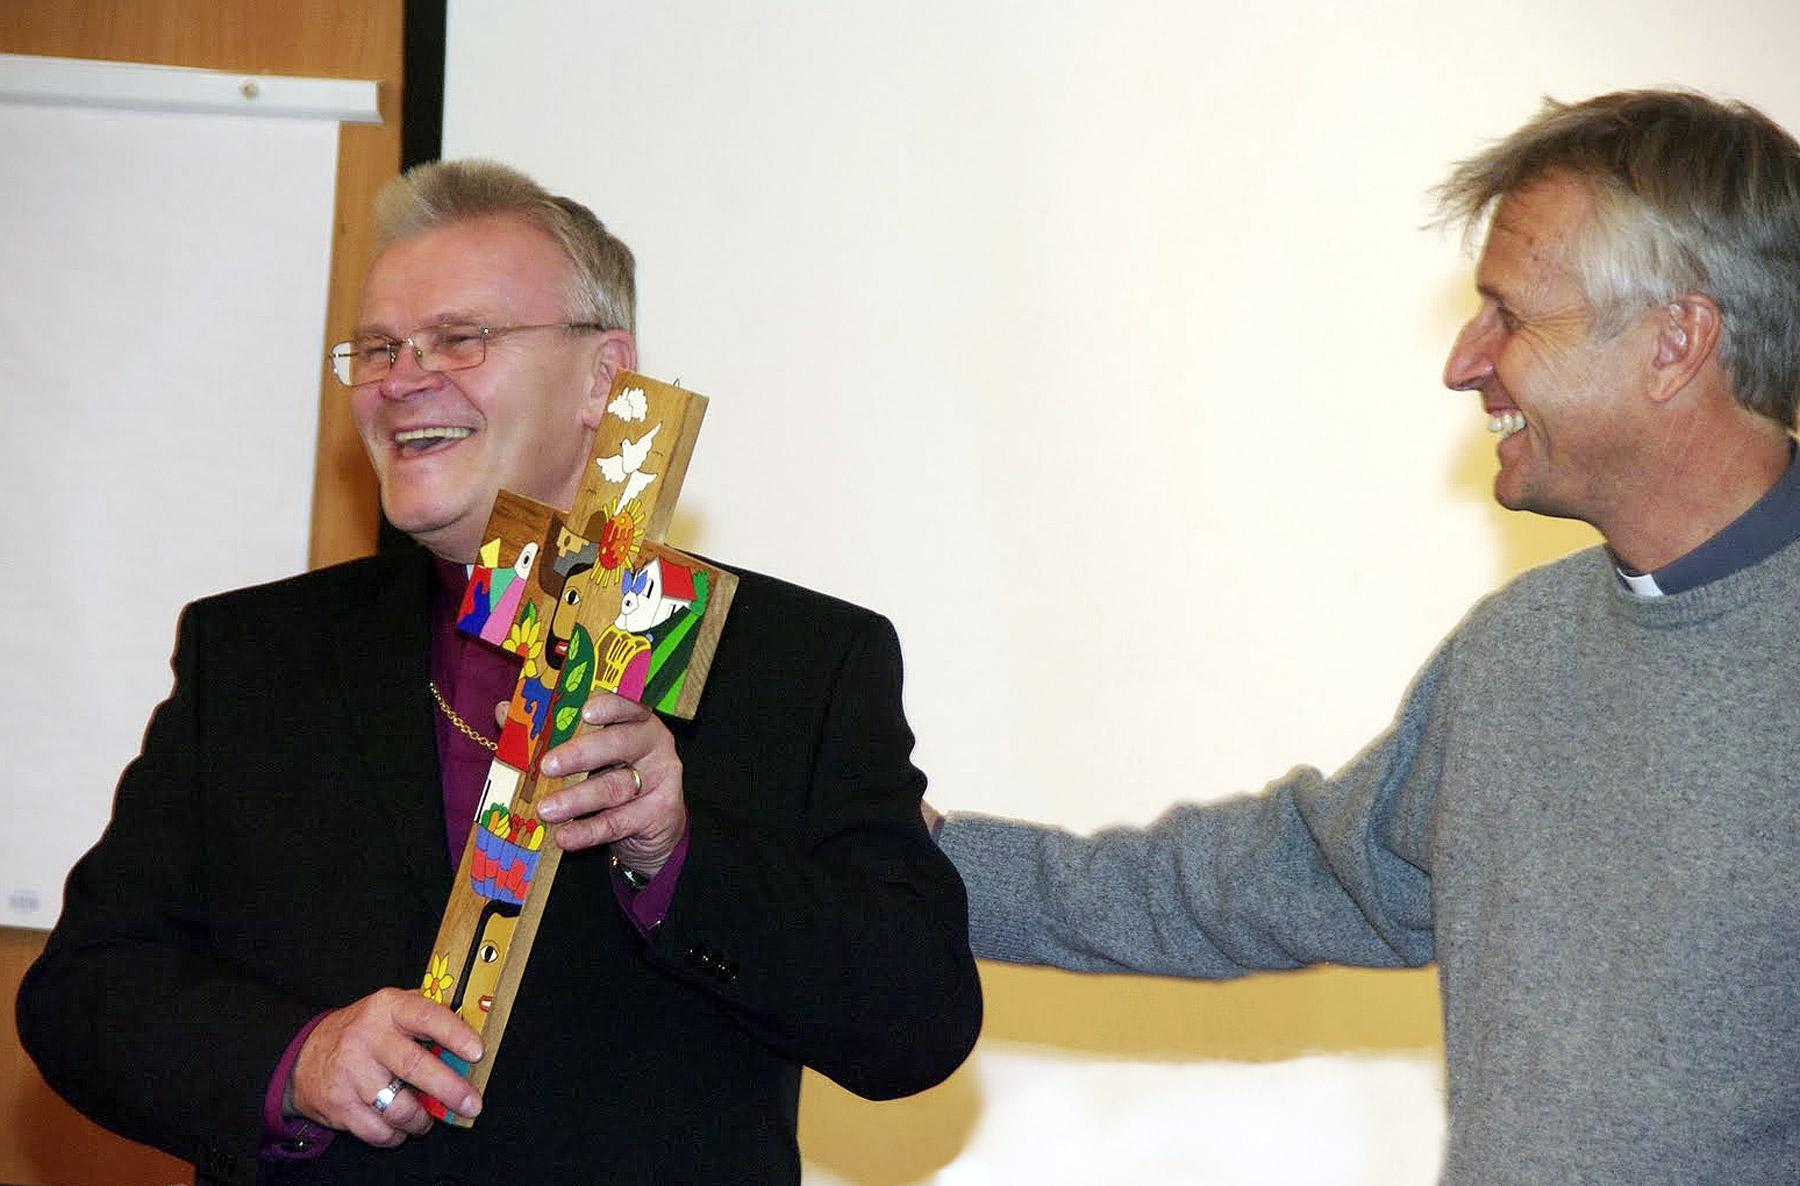 Rev. Martin Junge presents a cross from Central America to the Most Rev. Andres Poder, archbishop of EELC. Photo: Tiit Kuusemaa